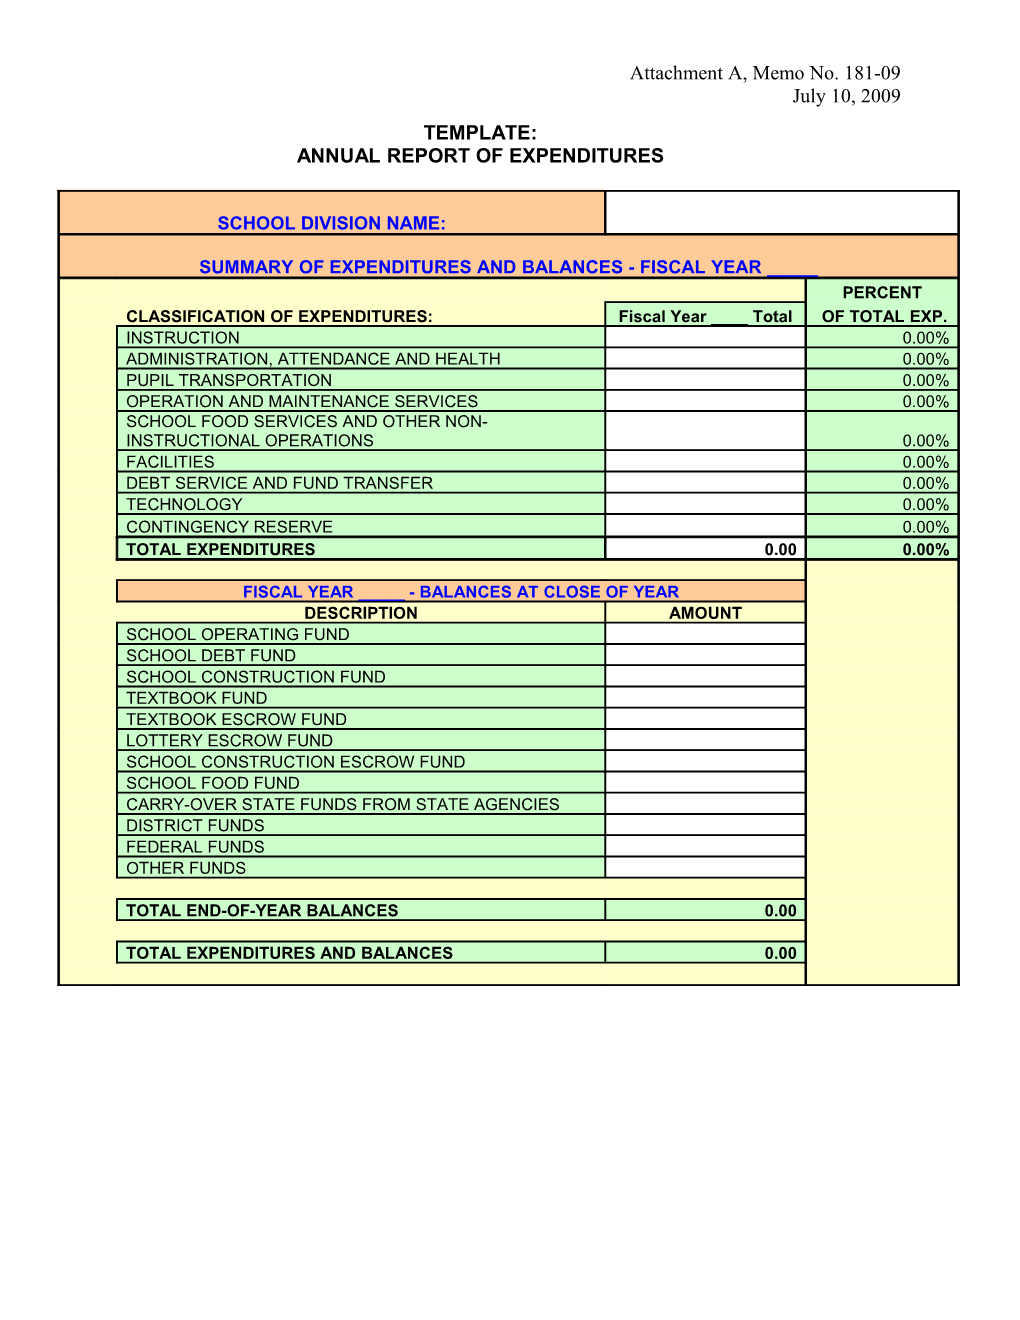 Annual Report of Expenditures